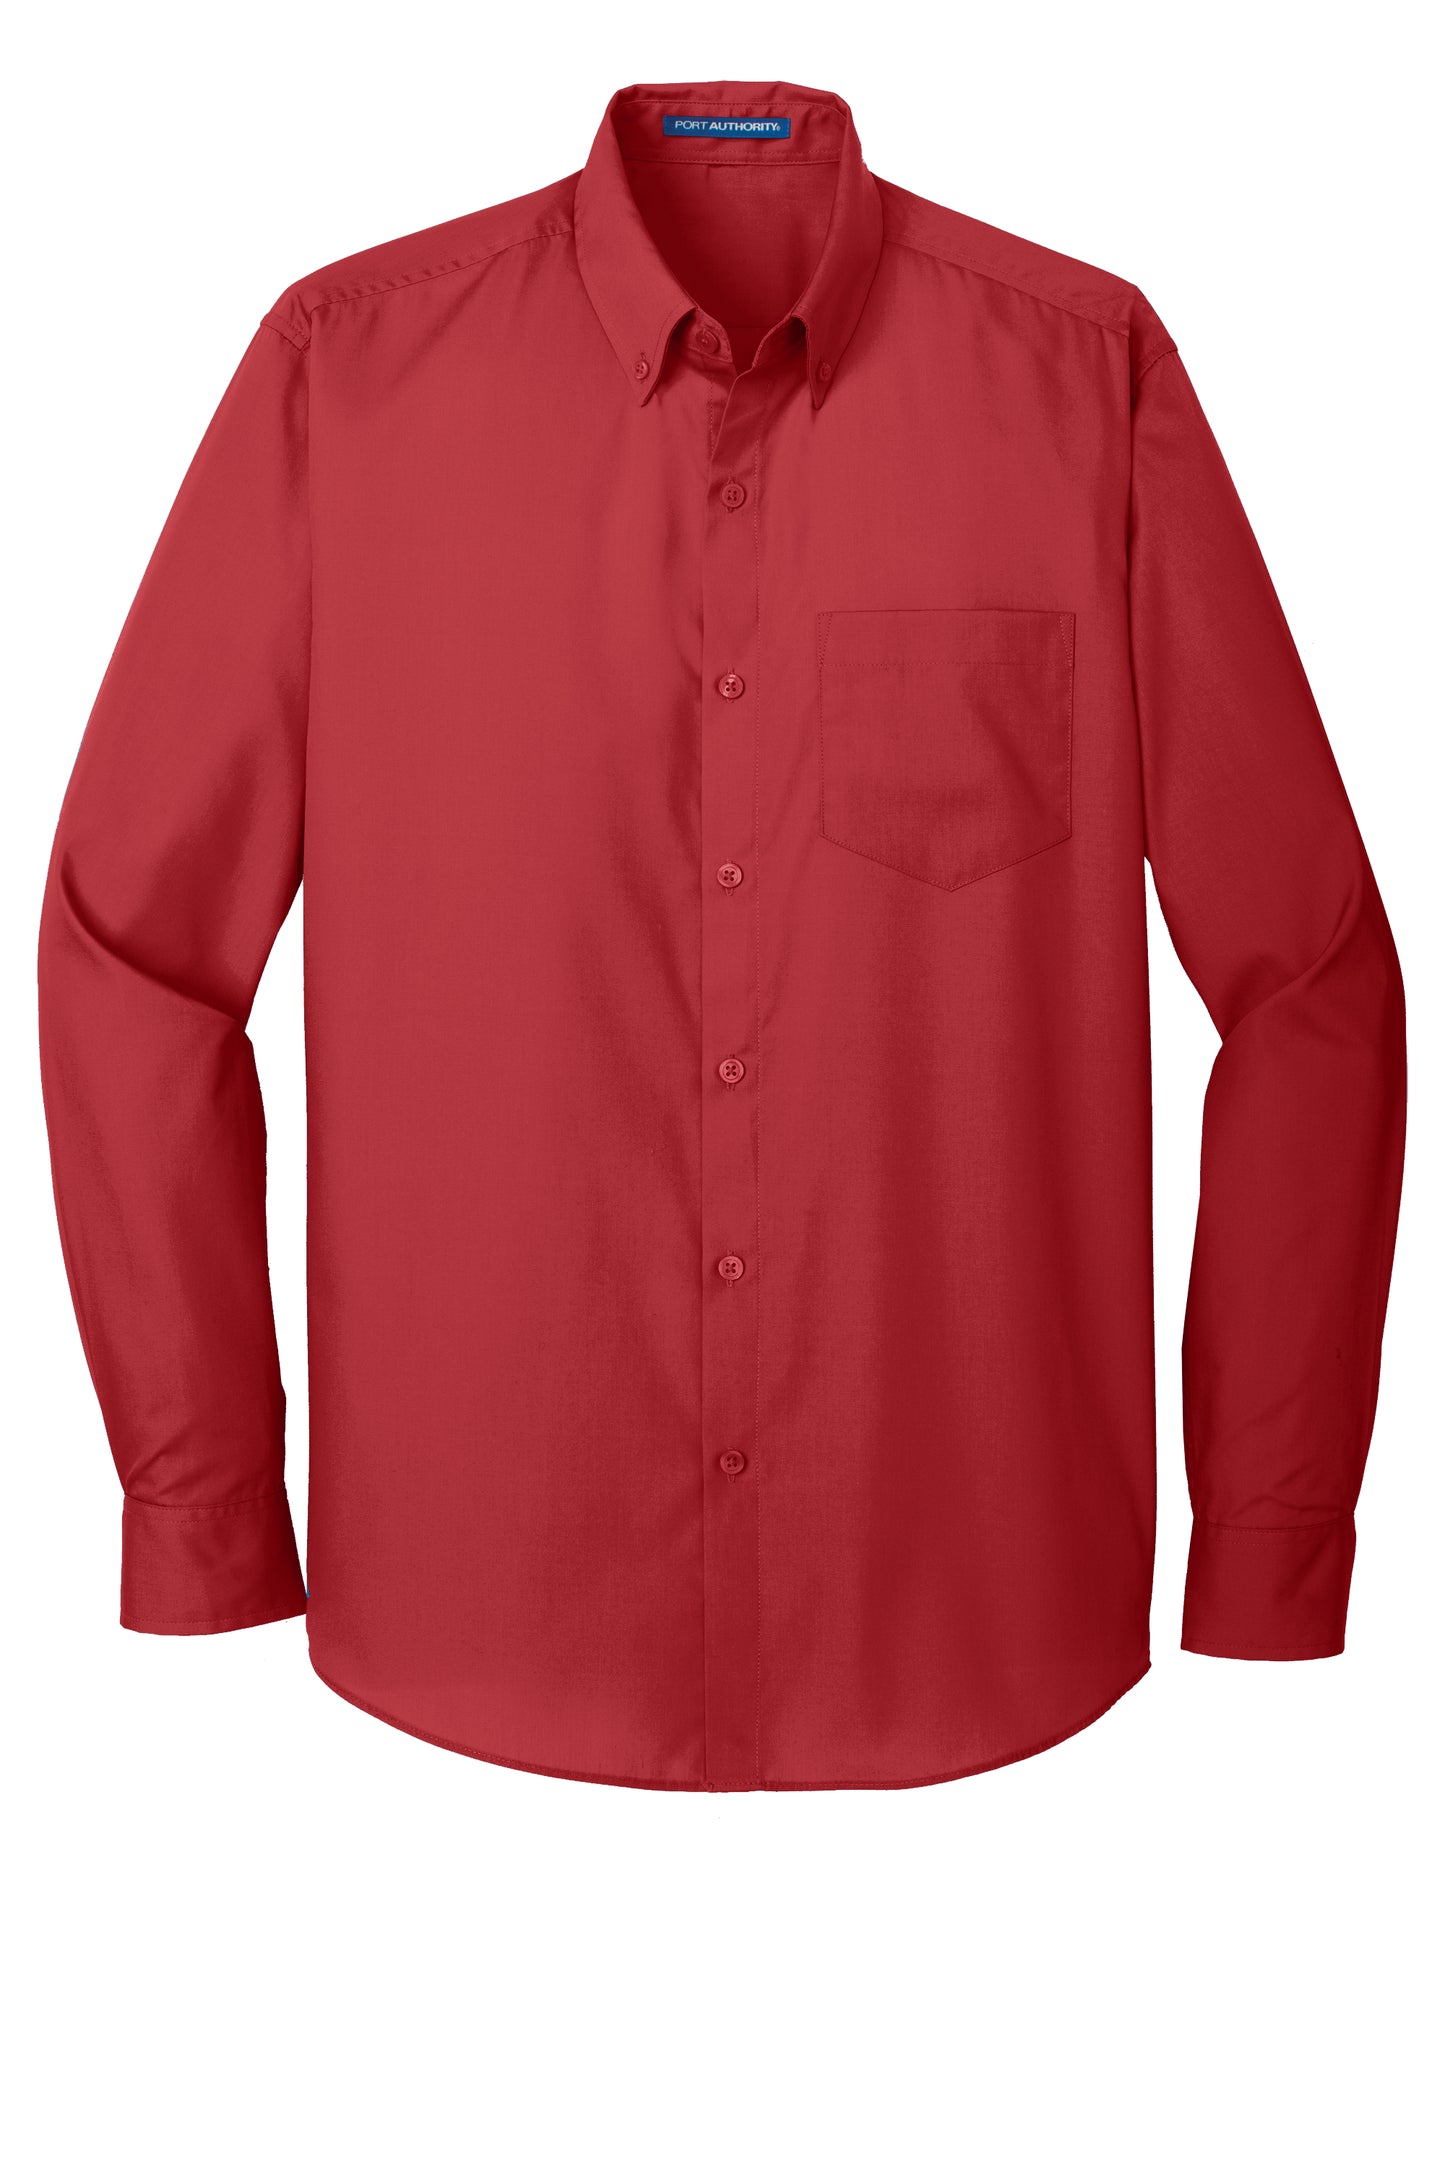 port authority long sleeve carefree poplin shirt rich red